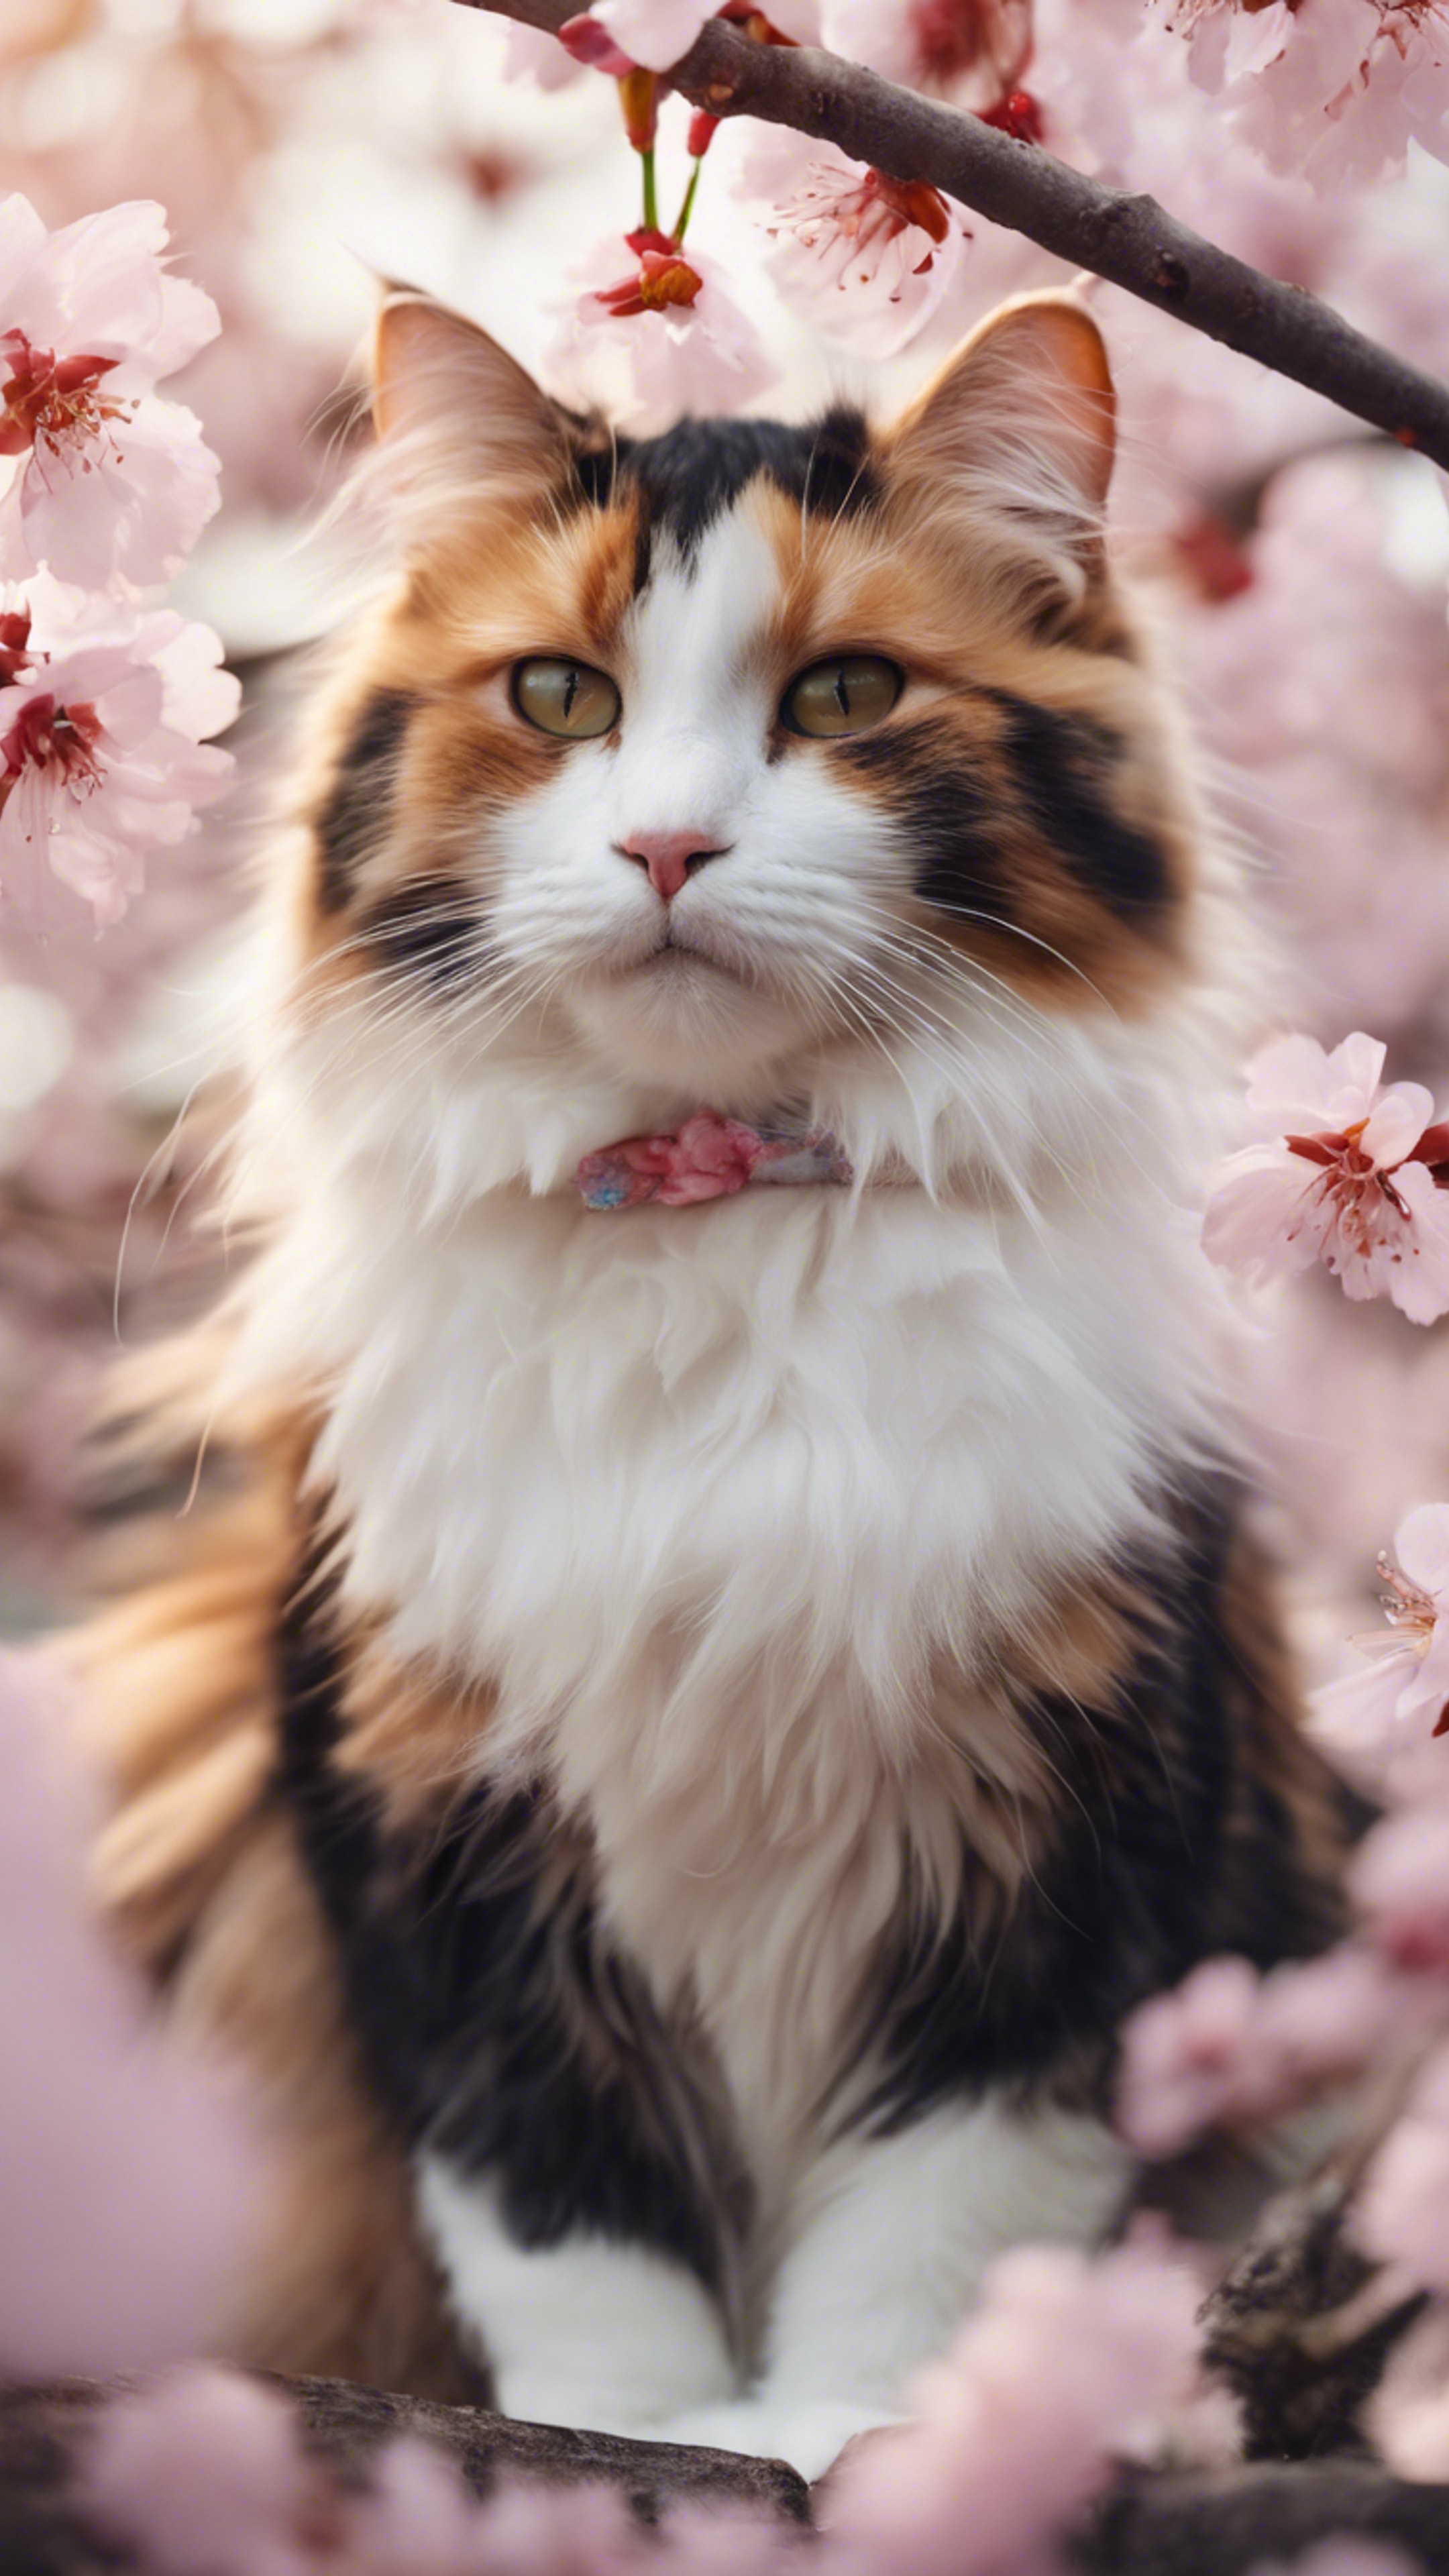 A fluffy calico cat in a cute pose sitting amongst cherry blossoms. Papel de parede[3cf3847c7c9c4f38aba7]